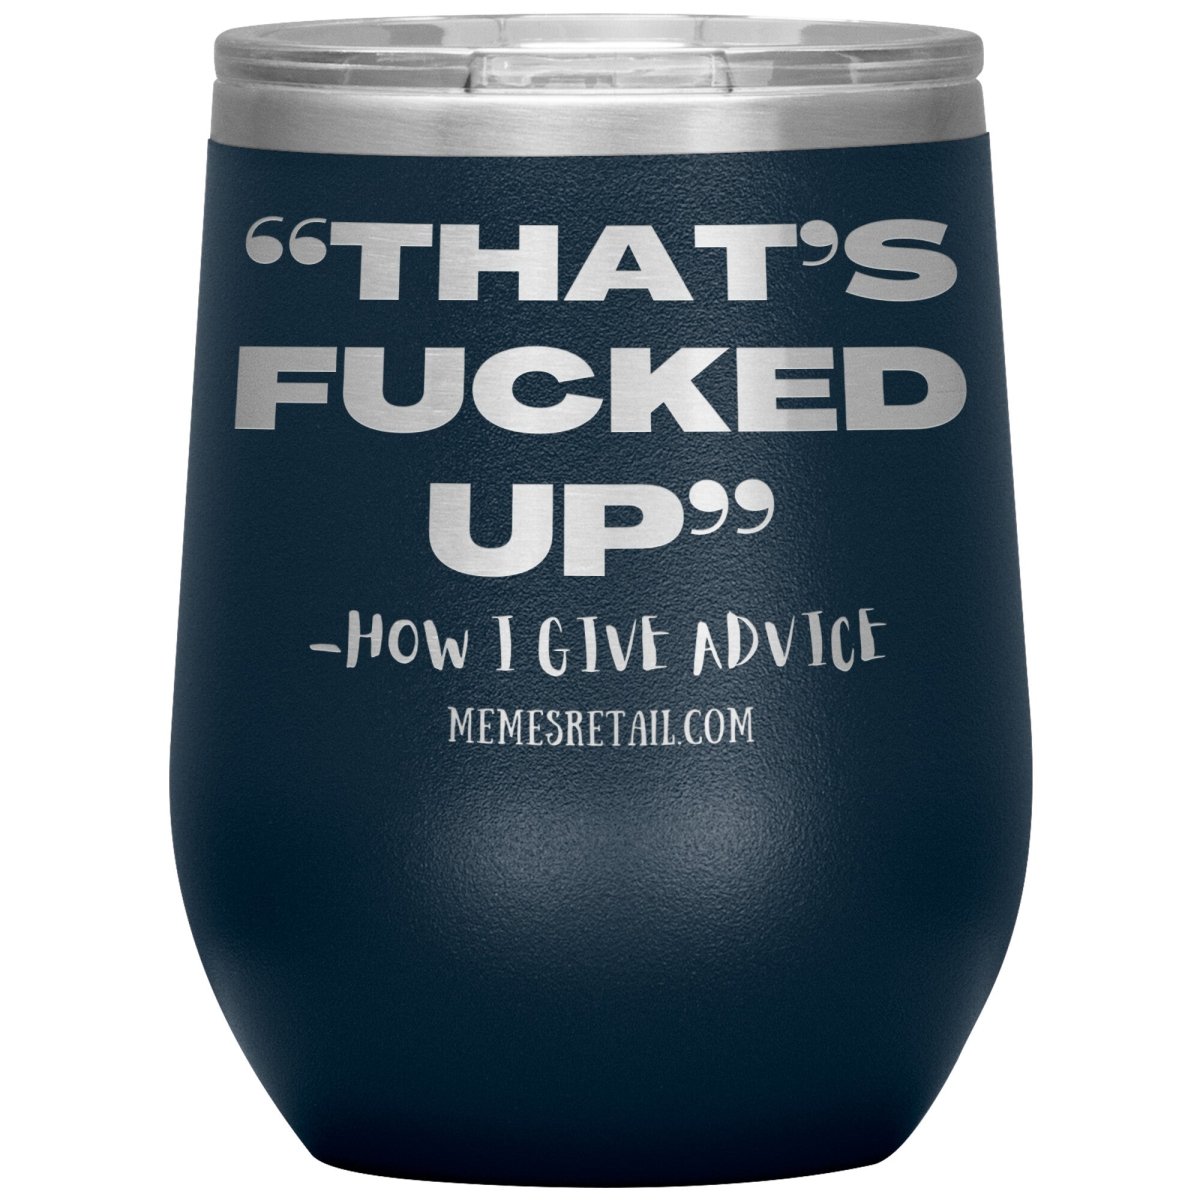 “That’s Fucked Up” -how I give advice Tumblers, 12oz Wine Insulated Tumbler / Navy - MemesRetail.com